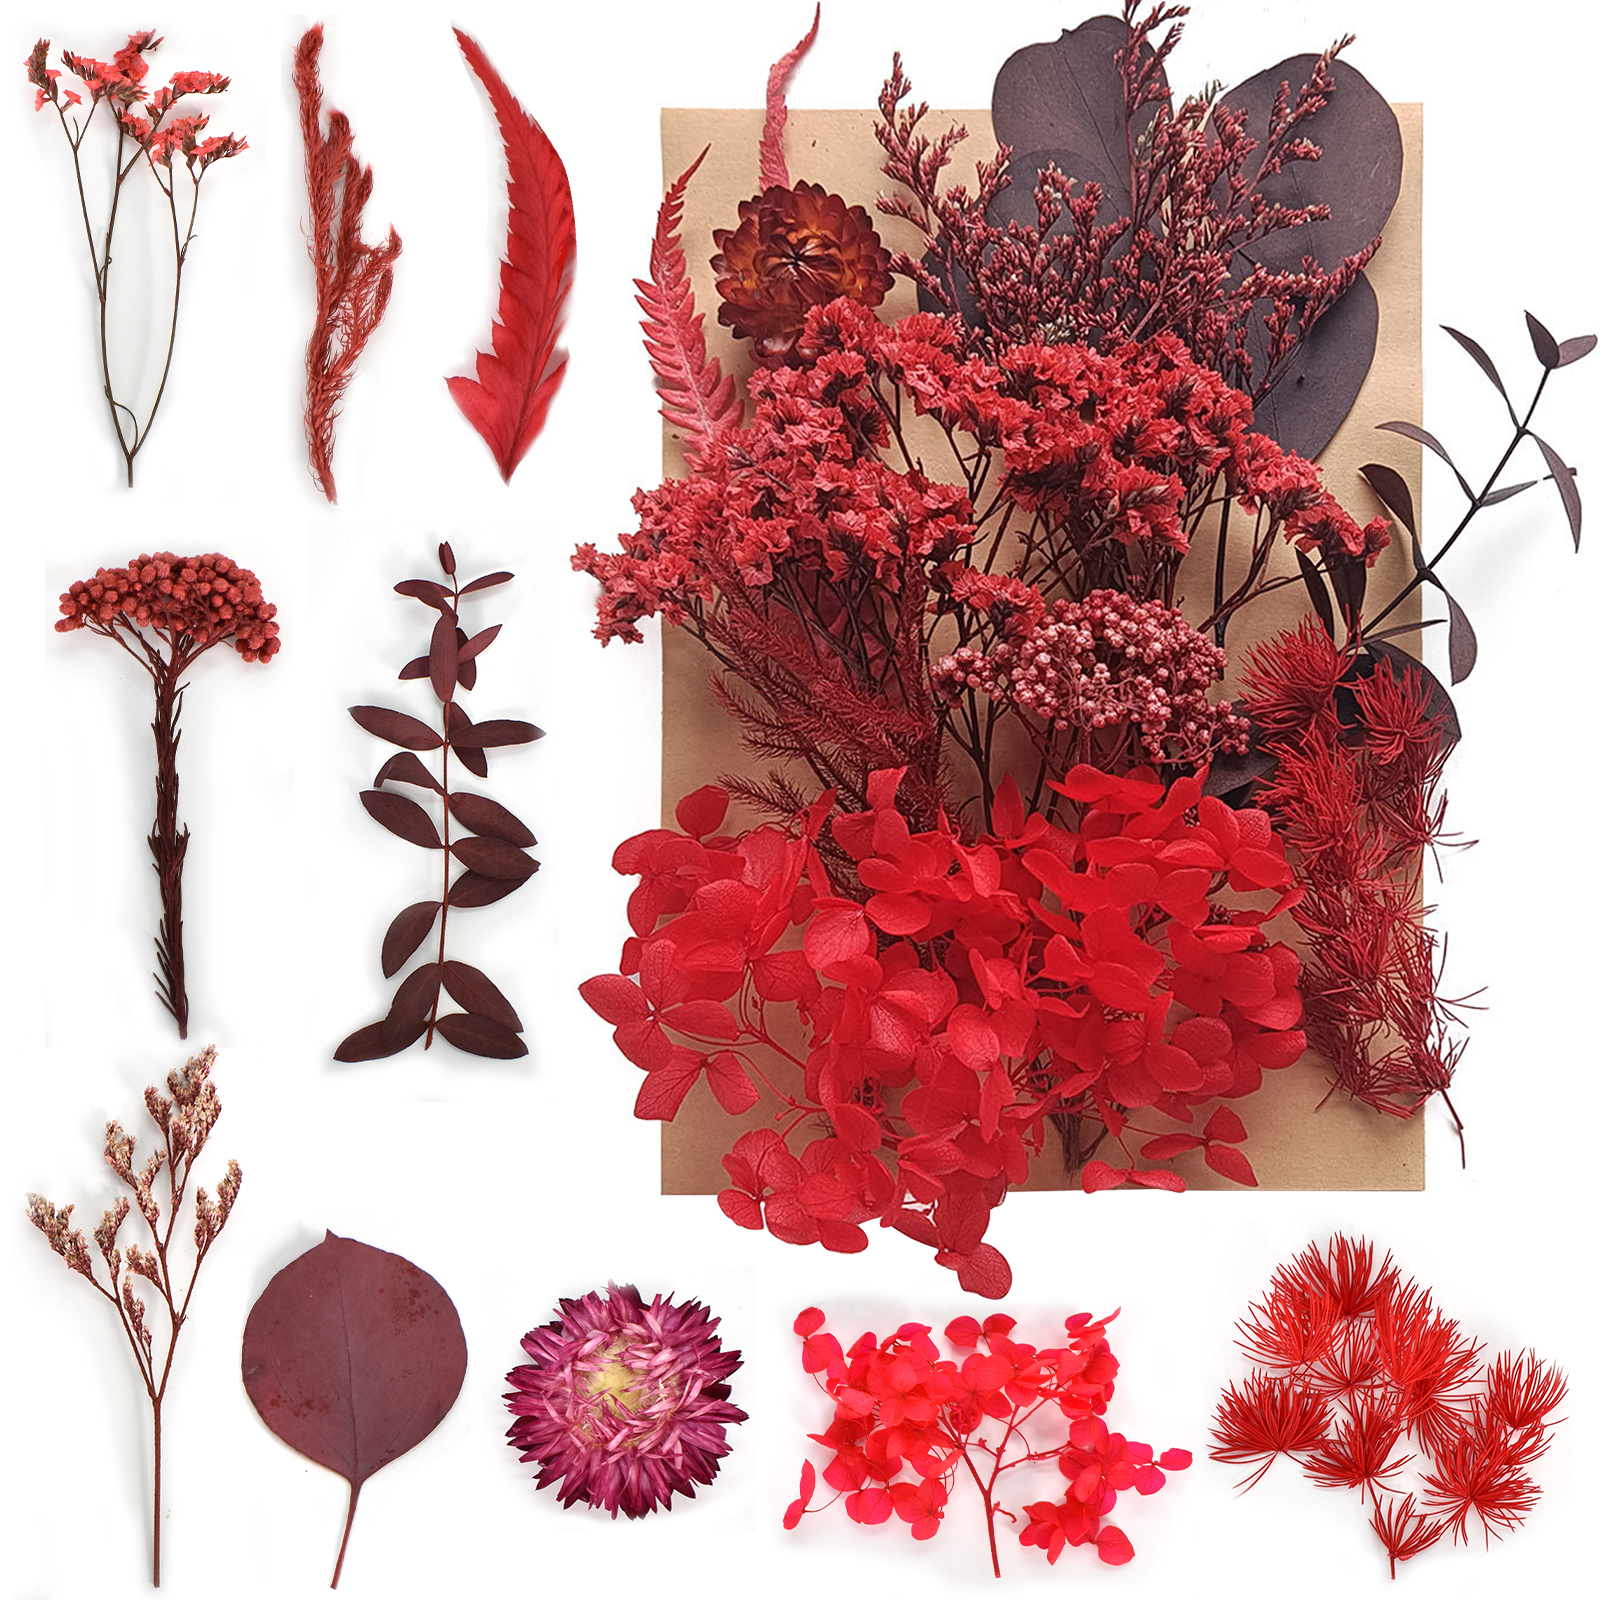 Colorful Real Dried Pressed Flowers Scrapbooking DIY Art Crafts Dried Flowers for Art Makeup Floral Decors 6